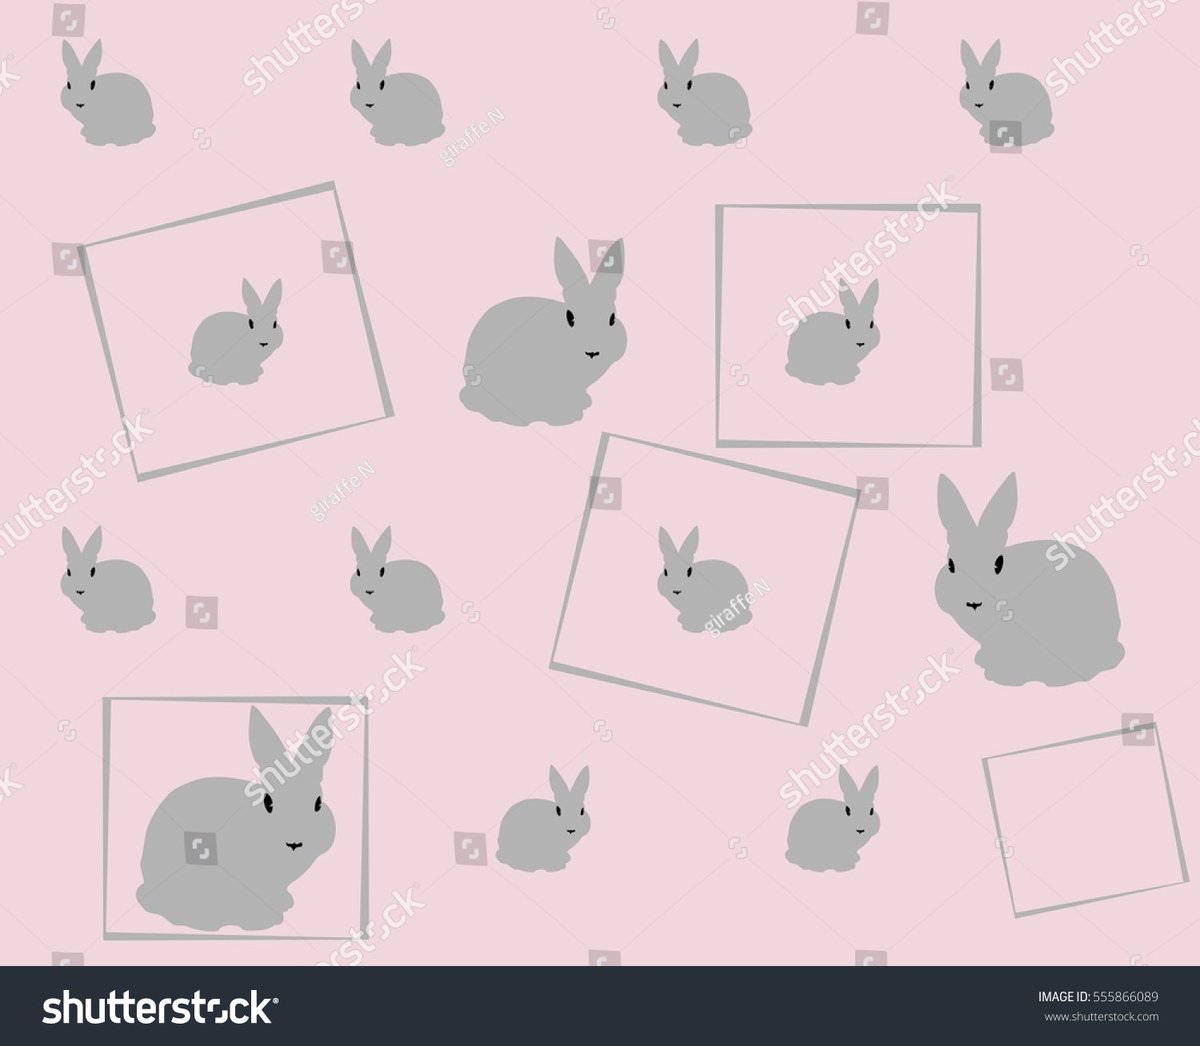 Design walls - The Wallpaper Company ##Childrenwallpaper A pink and grey wallpaper is a great way to introduce a feminine touch to your interiorKids Pink Pop Up RabbitsWallpaper
designwalls.in, wallpaperinstallation.in  @designwalls9 - Contact for more details 98666678689